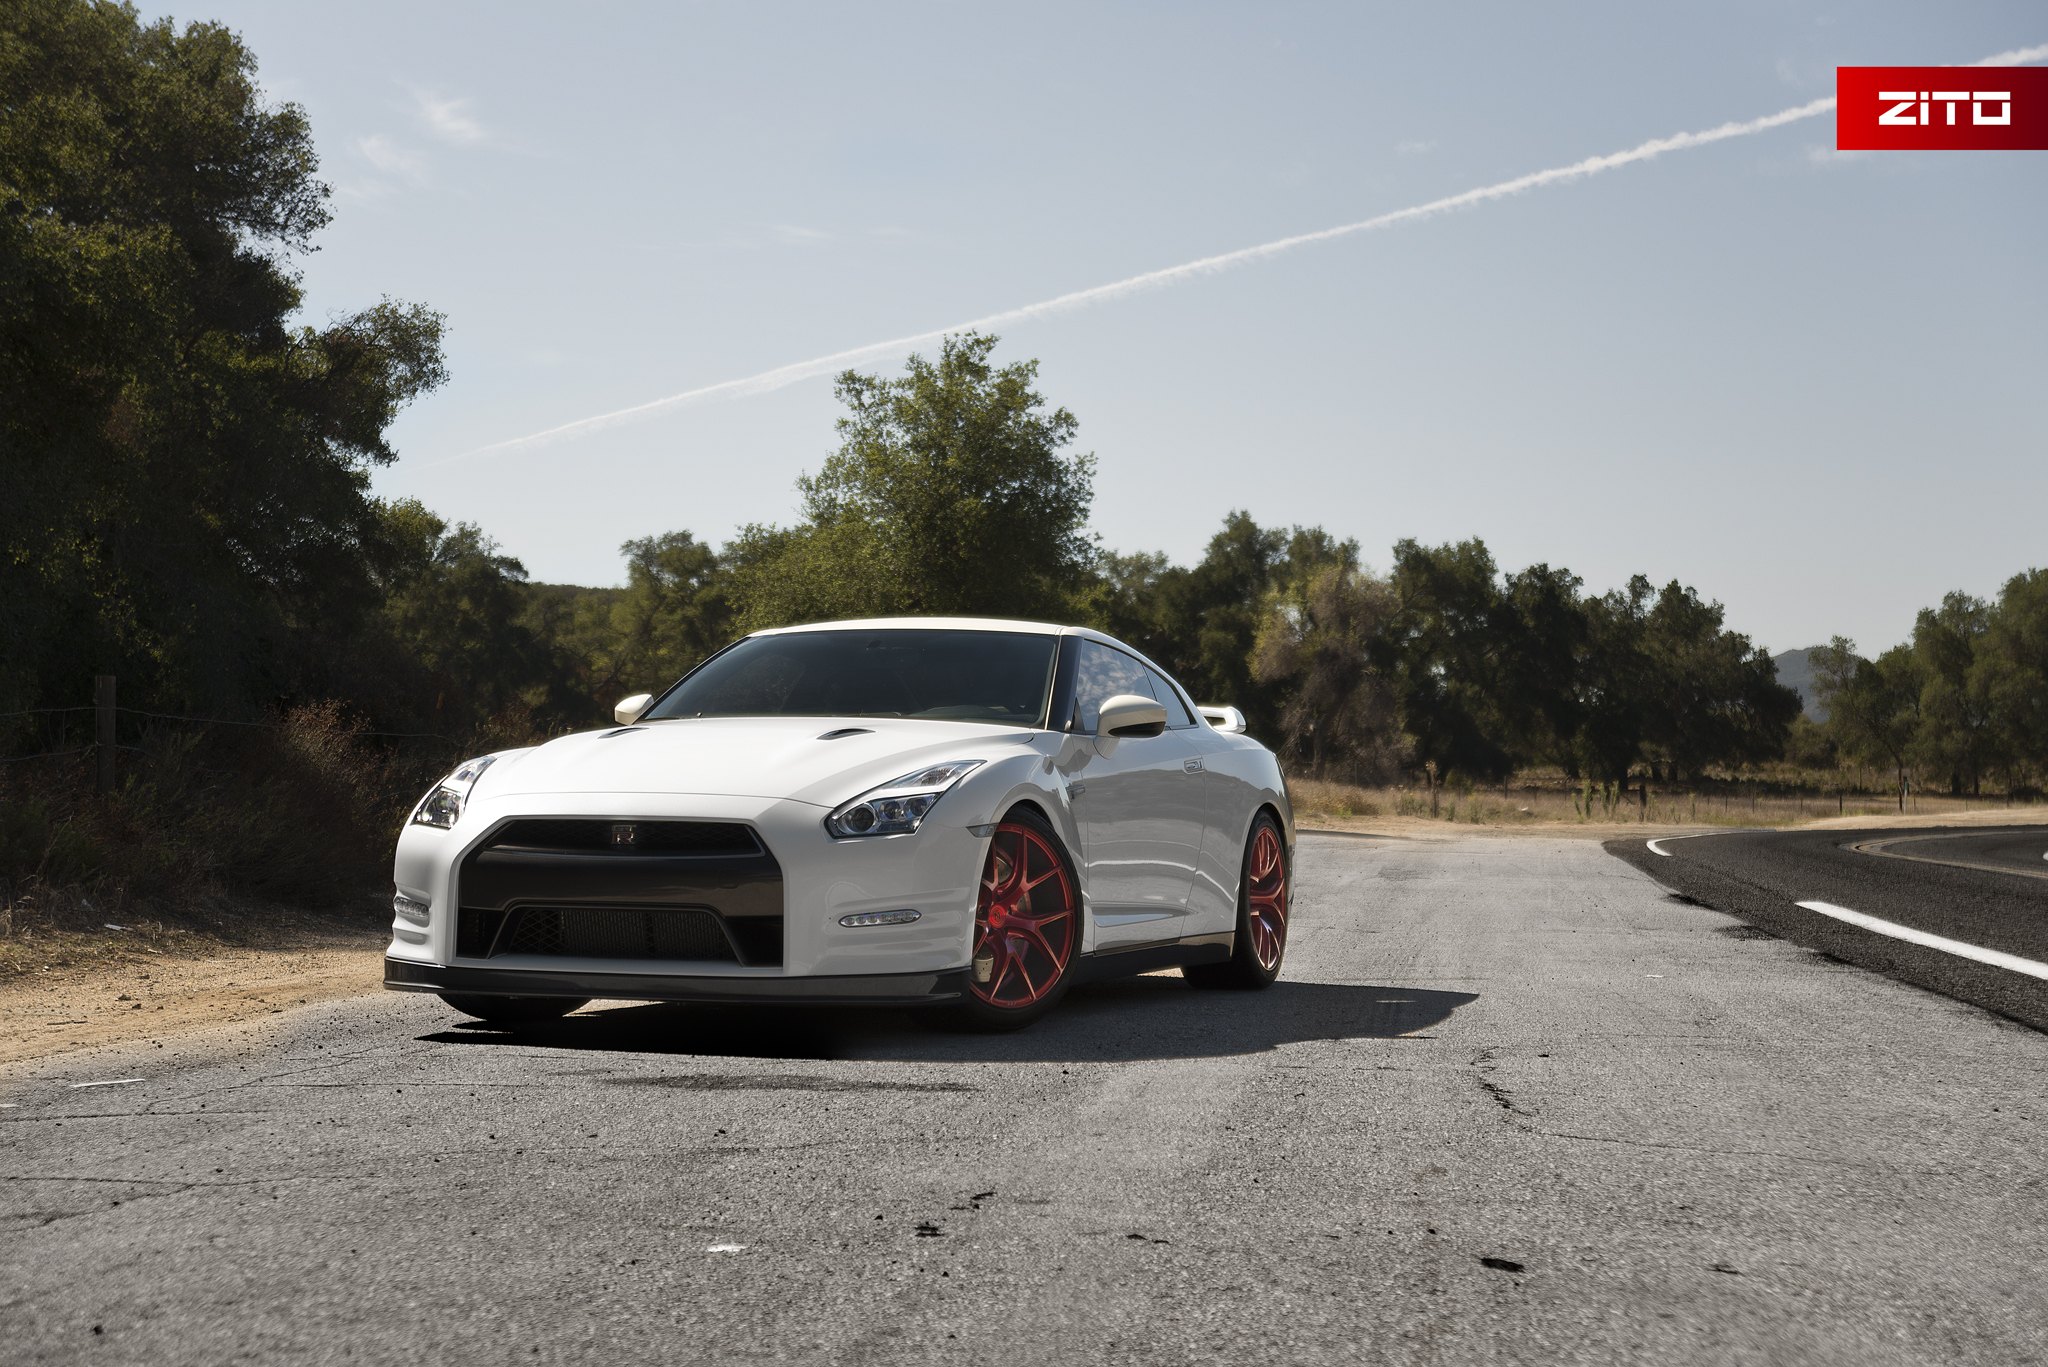 Custom Hood with Air Vents on White Nissan GT-R - Photo by Zito Wheels